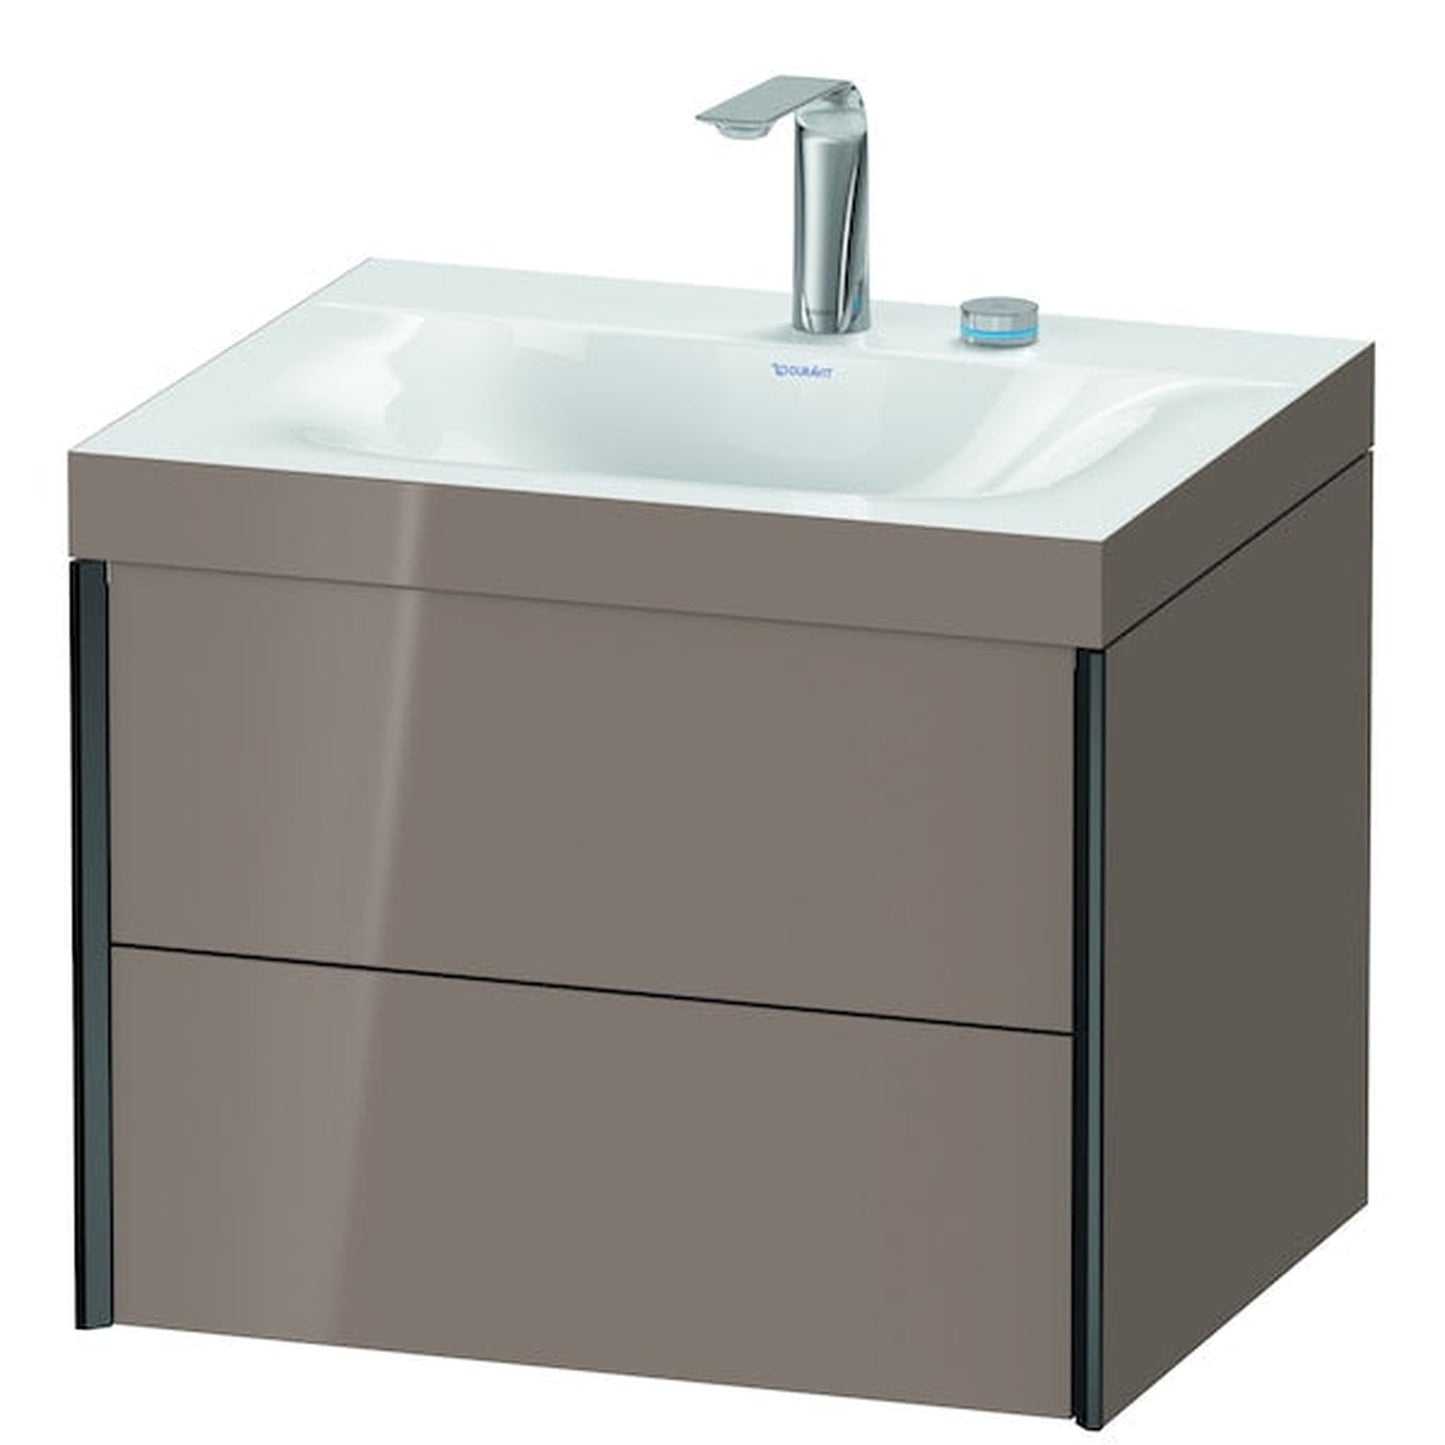 Duravit Xviu 24" x 20" x 19" Two Drawer C-Bonded Wall-Mount Vanity Kit With Two Tap Holes, Cappuccino (XV4614EB286C)